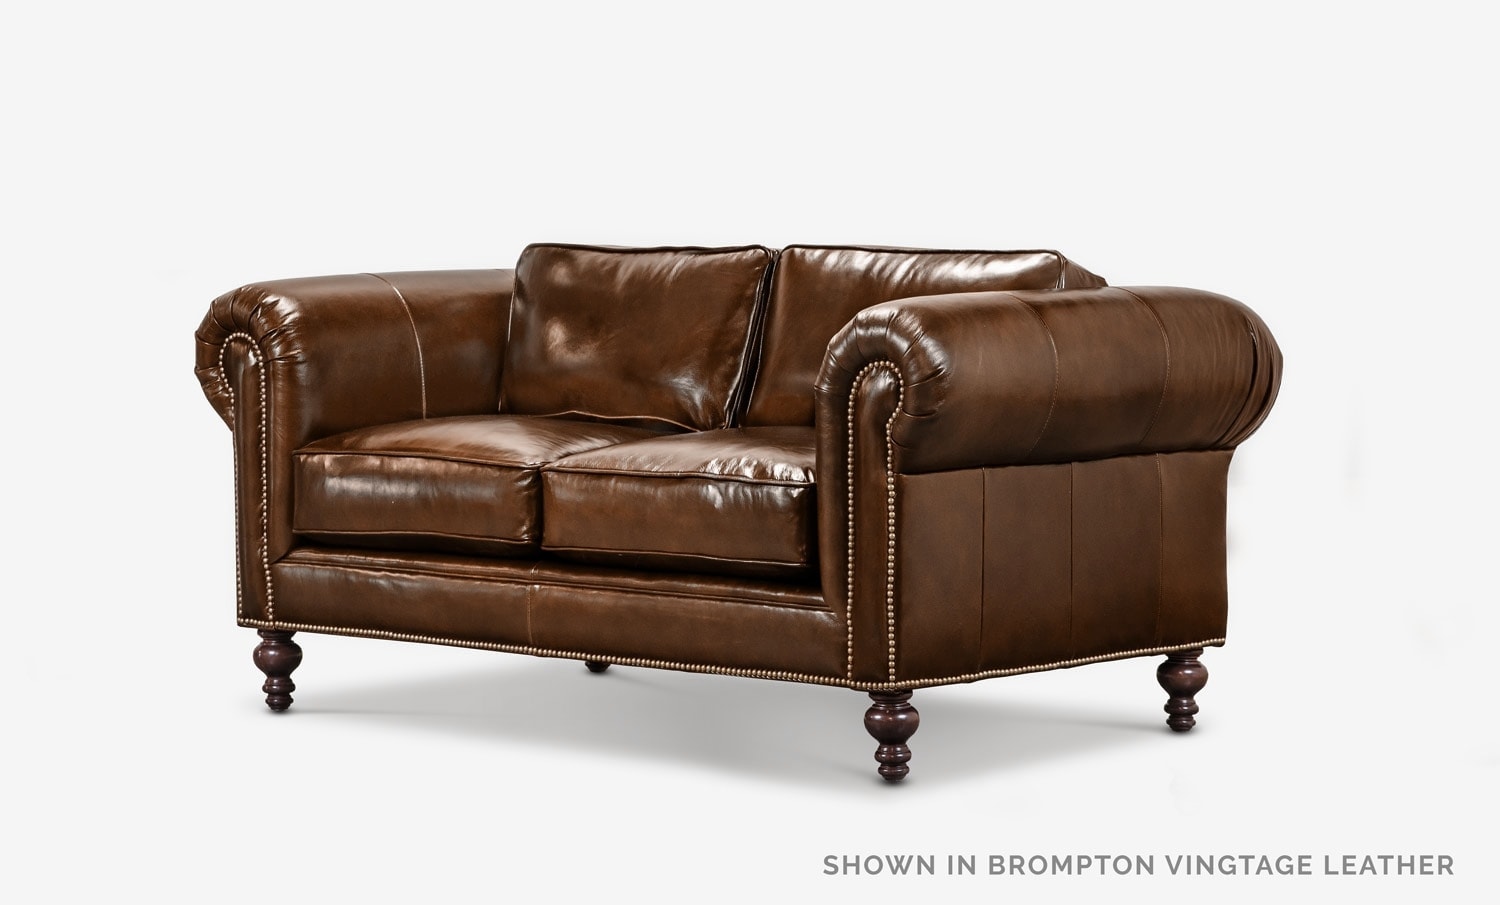 The Sidney: Modern Chesterfield Love Seat in Brompton Vintage Brown Leather